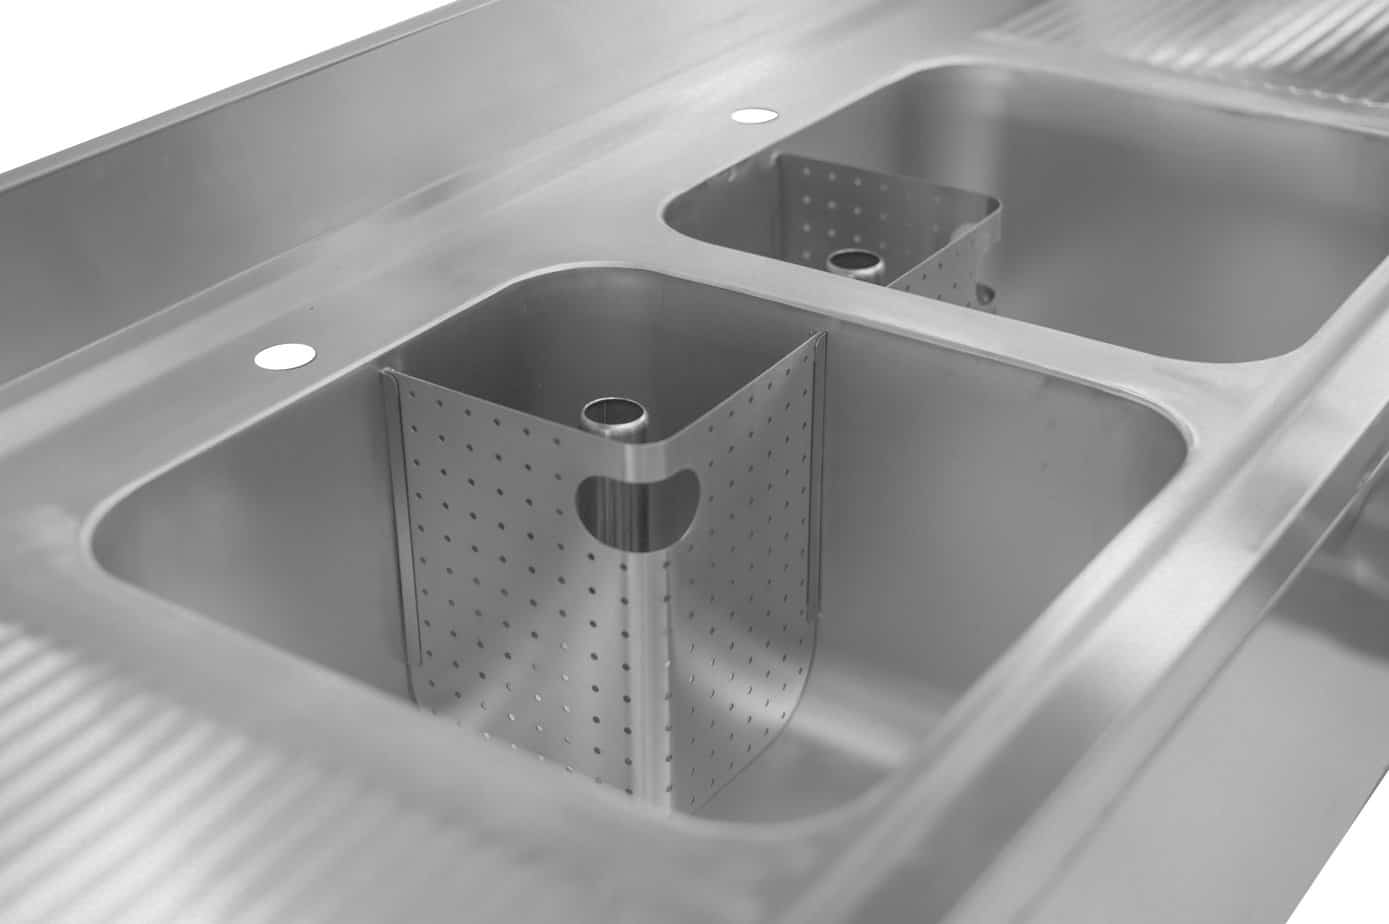 Large Catering Sink - commercial catering sinks